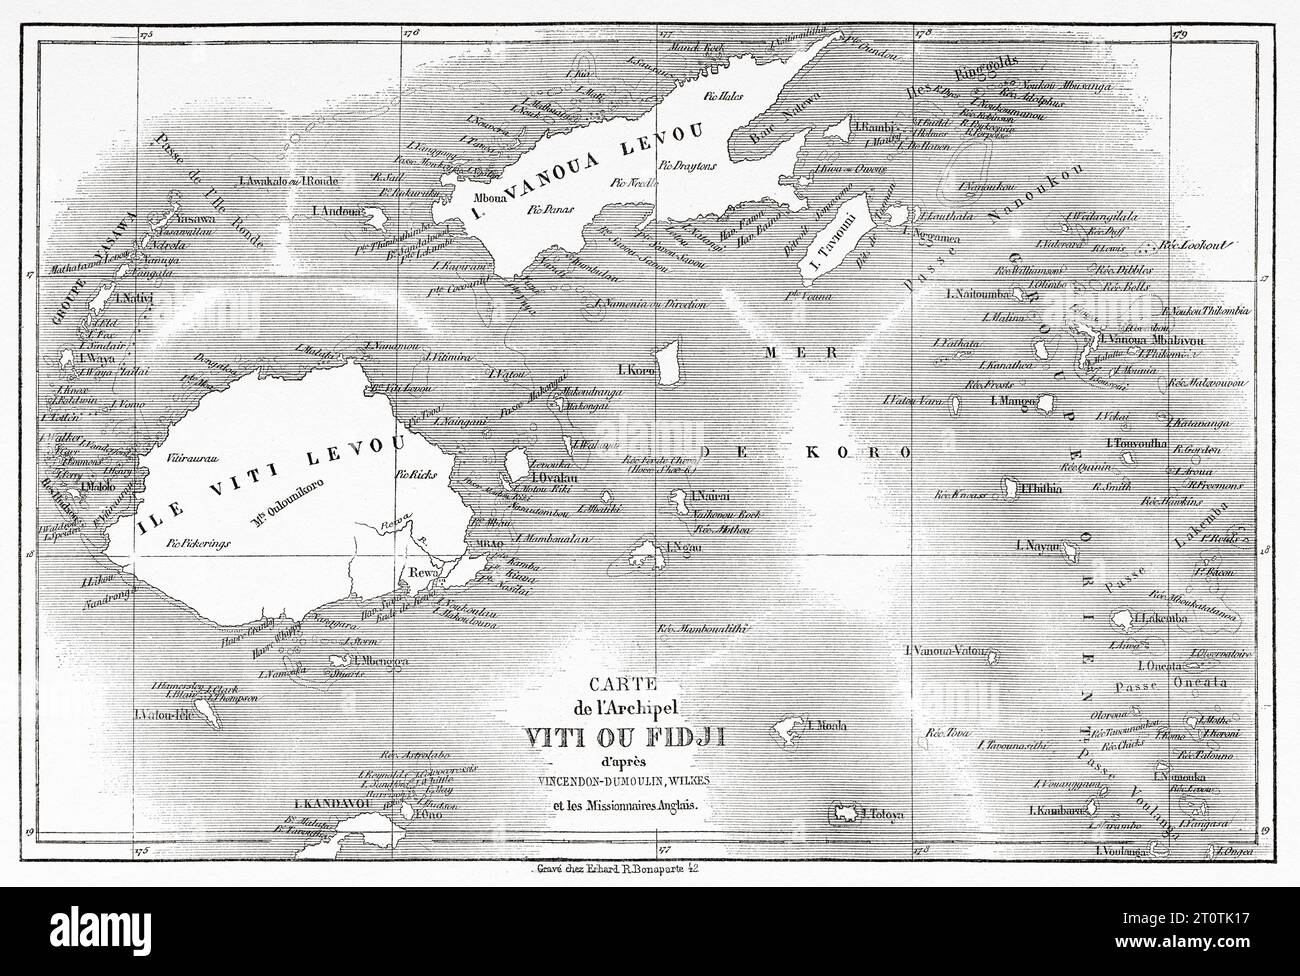 Old map of Fiji islands. Melanesia, Oceania in the southwestern Pacific Ocean. Voyage to the Great Viti, great equinoctial ocean by John Denis Macdonald 1855. Old 19th century engraving from Le Tour du Monde 1860 Stock Photo